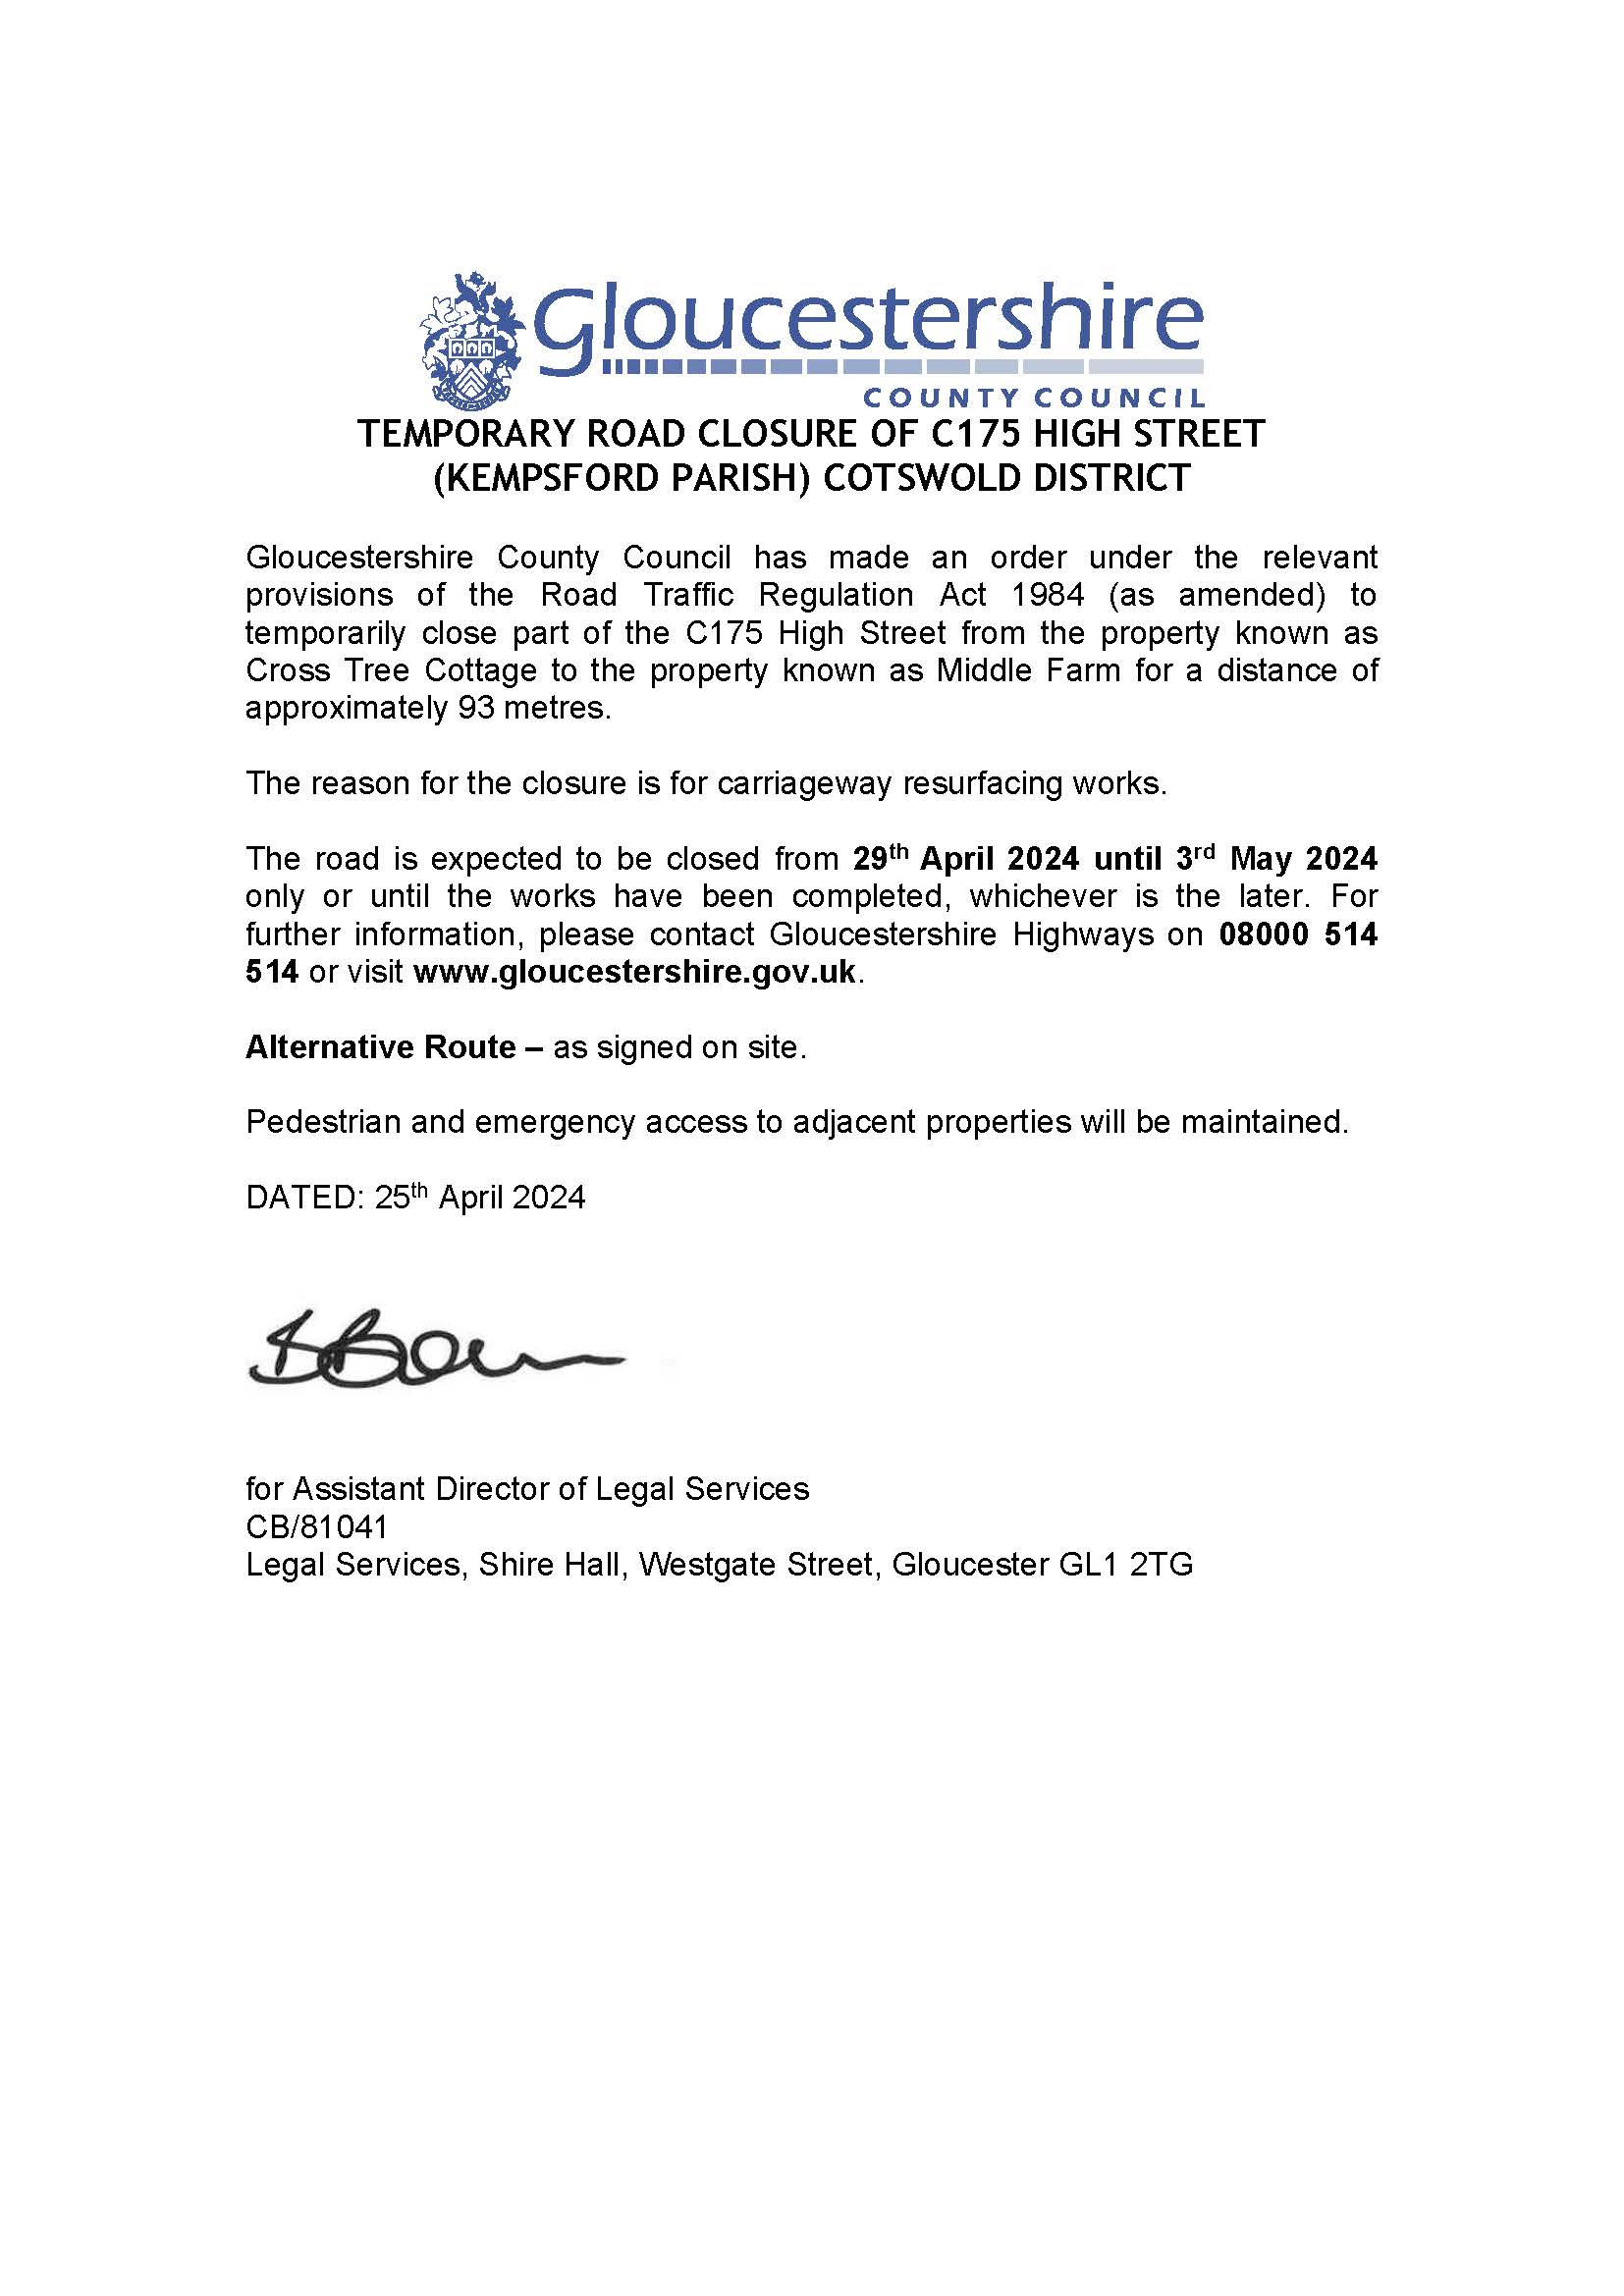 Temporary Road Closure: C175 - High Street, Kempsford, Cotswold 29/04/24- 03/05/24 